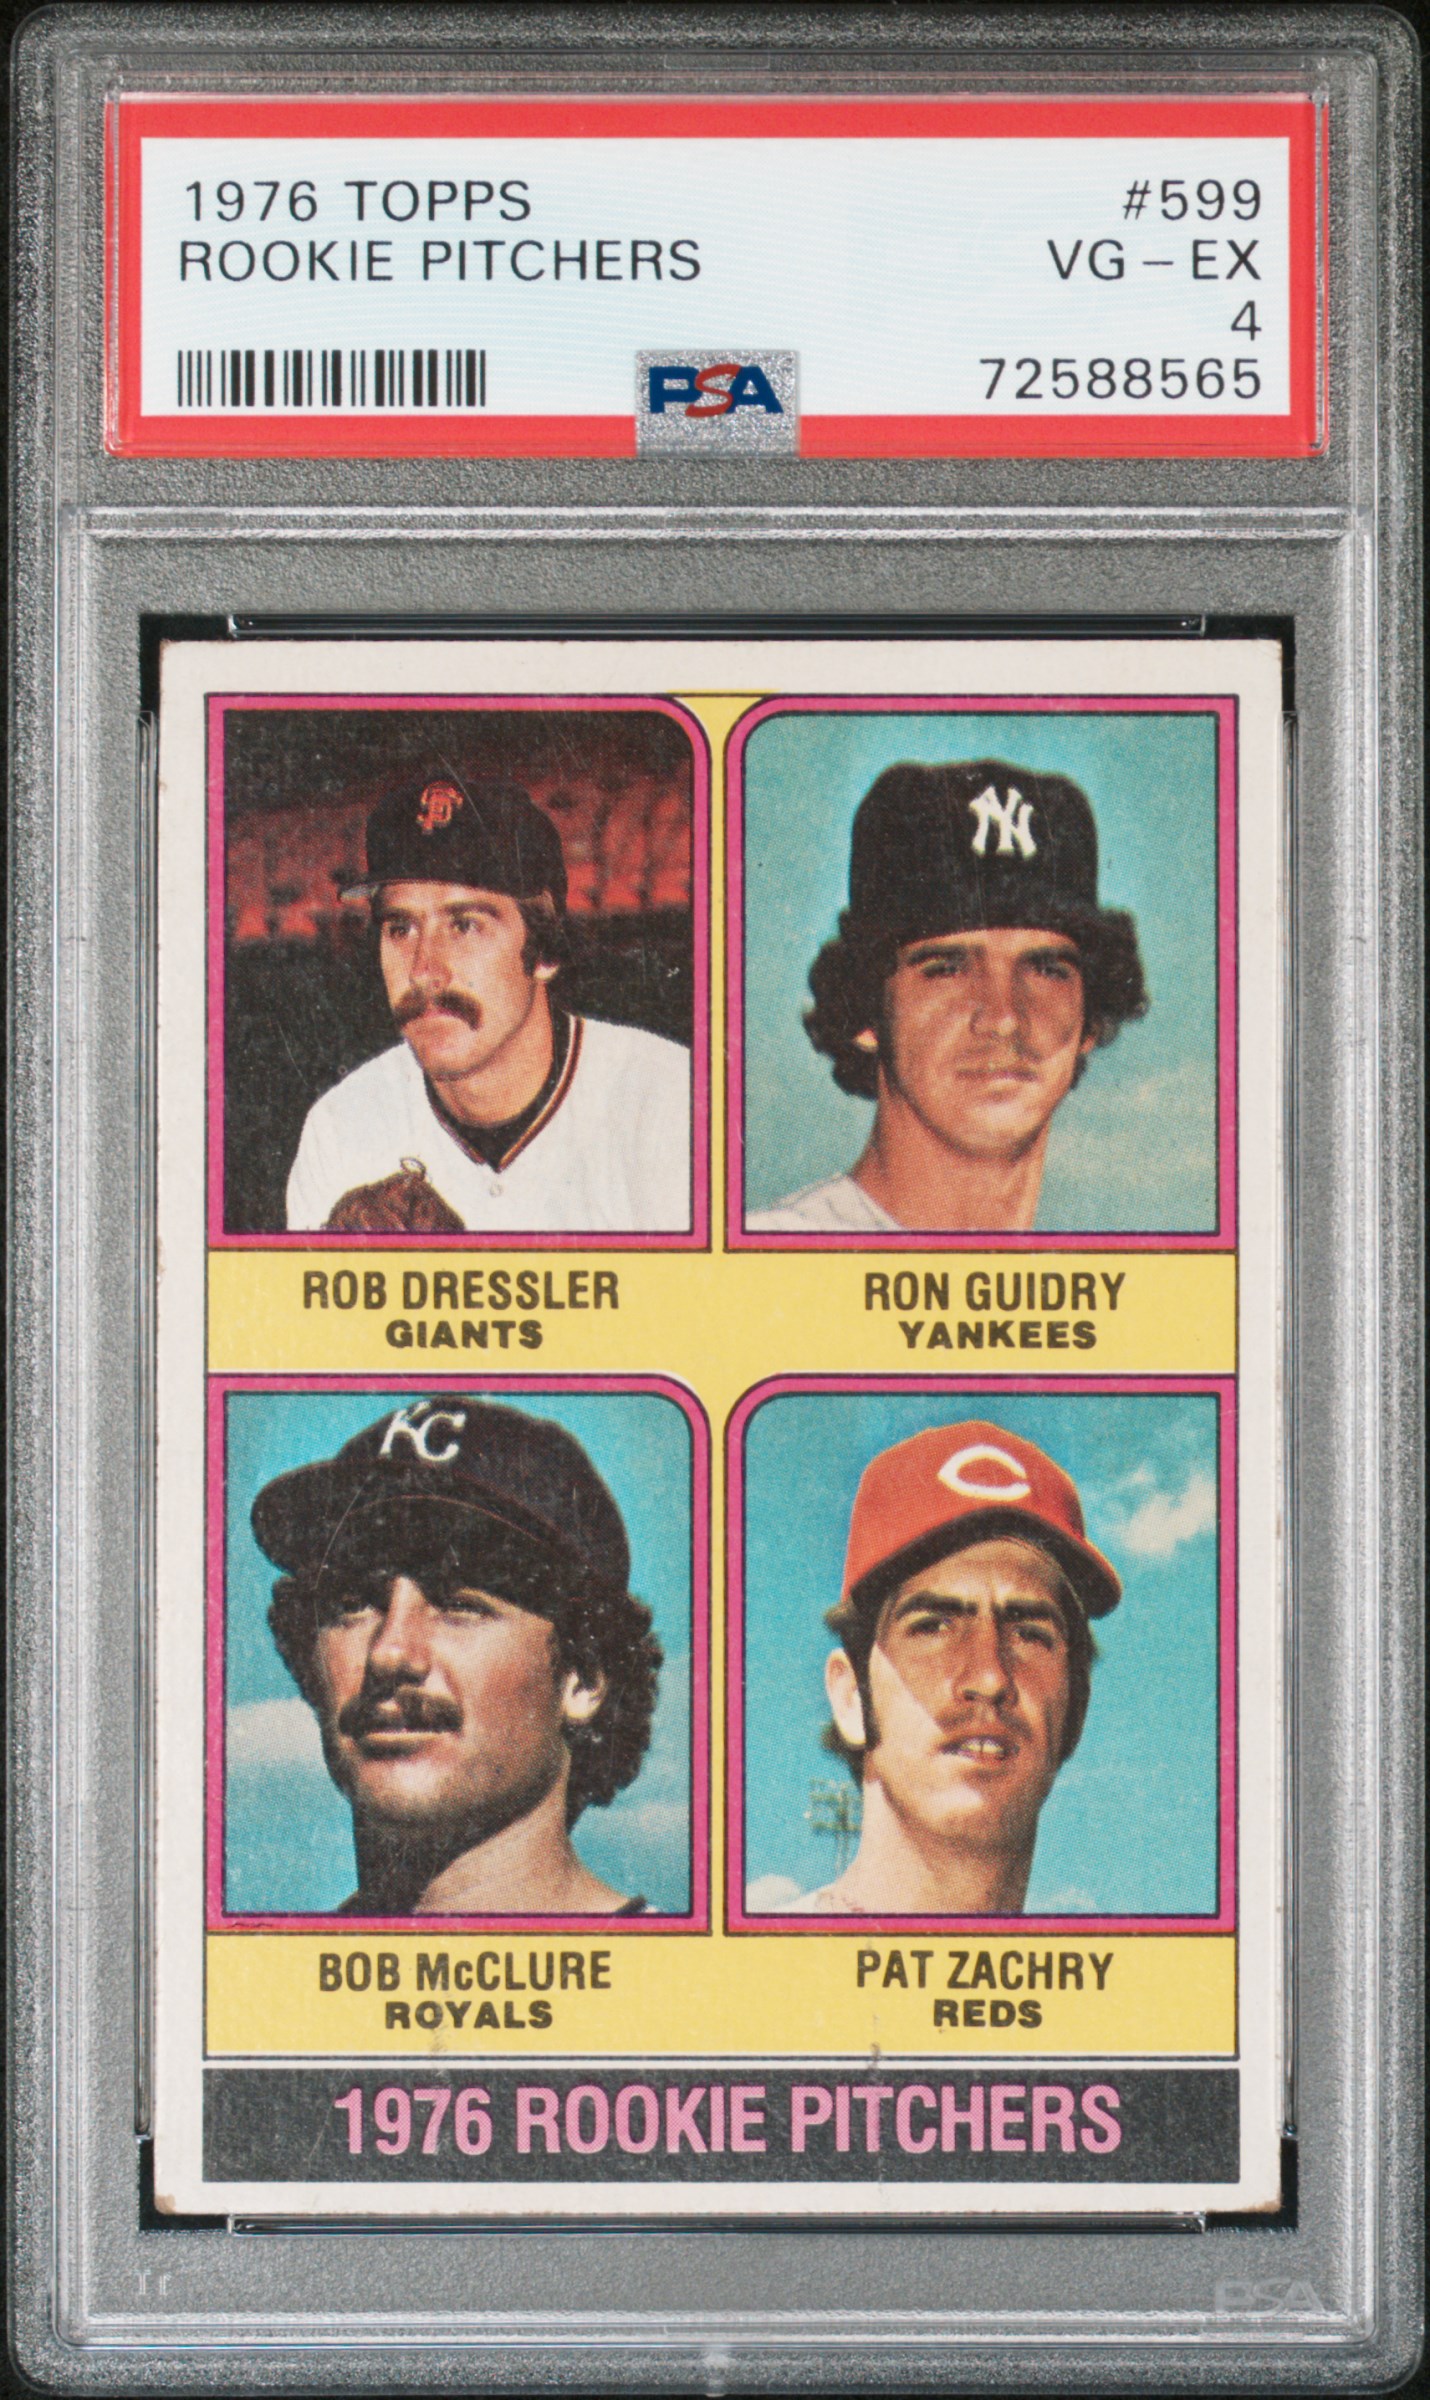 1976 Topps Rookie Pitchers #599 Ron Guidry Rookie Card - PSA VG-EX 4